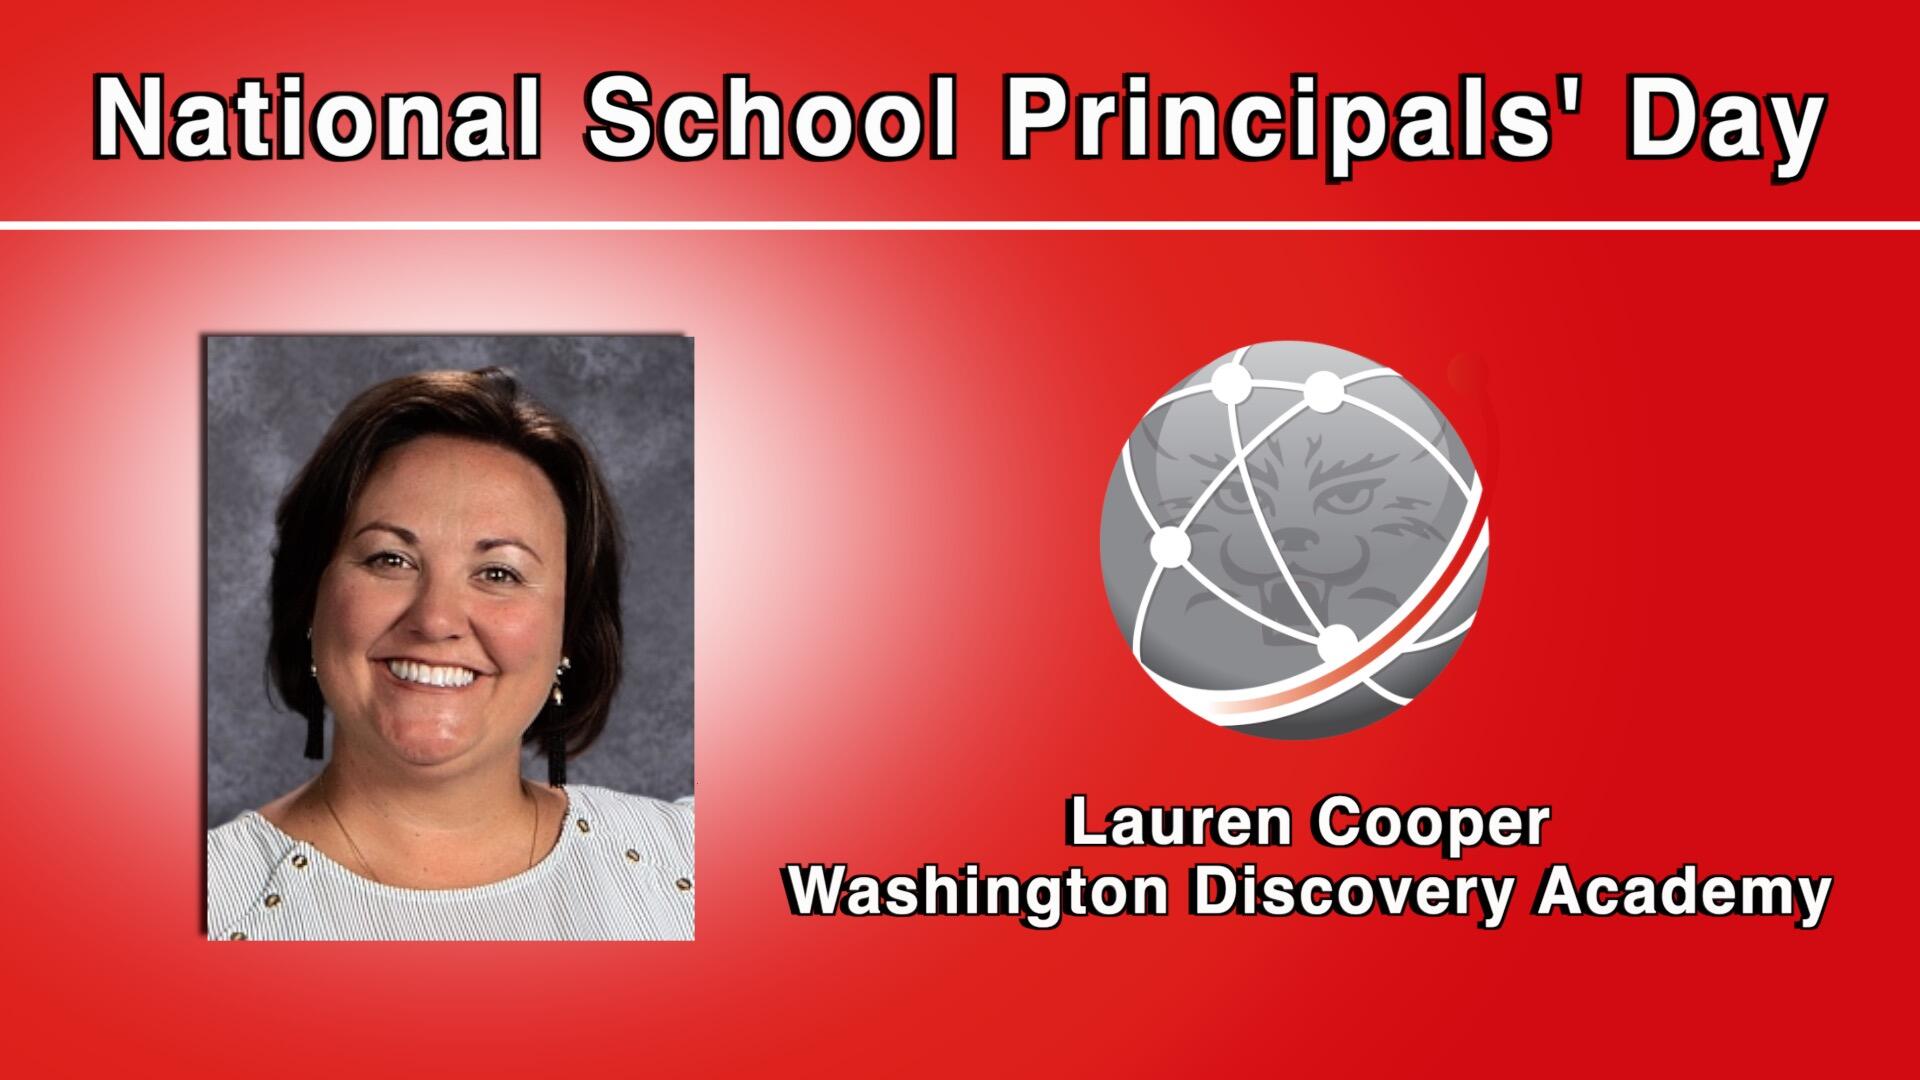 National School Principals' Day-Lauren Cooper-Washington Discovery Academy and logo